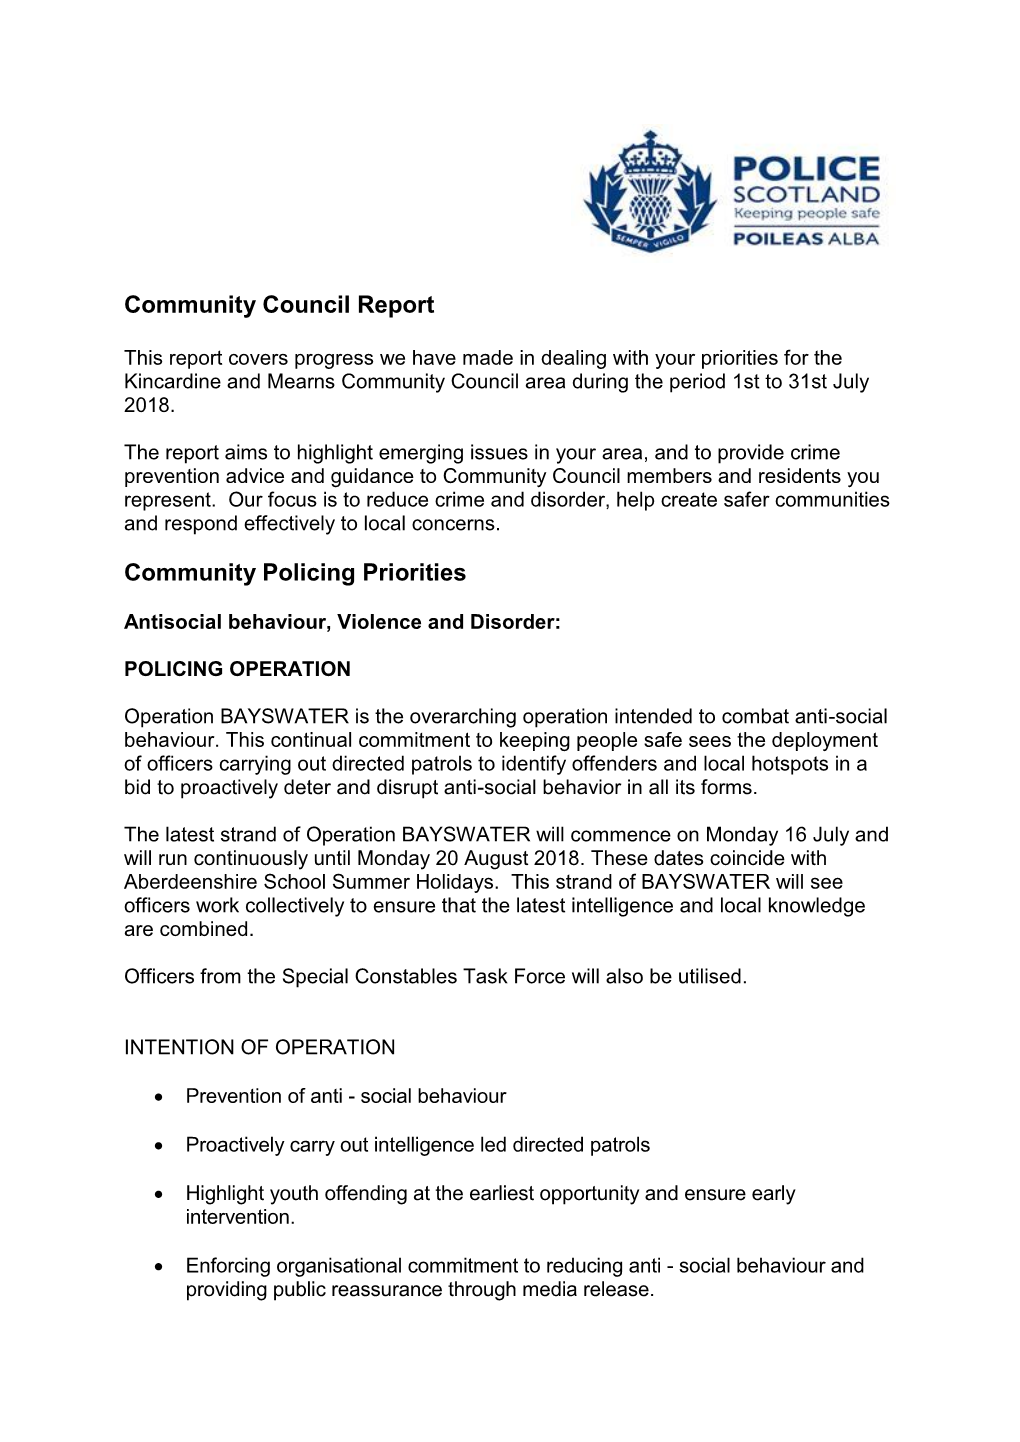 Community Council Report Community Policing Priorities